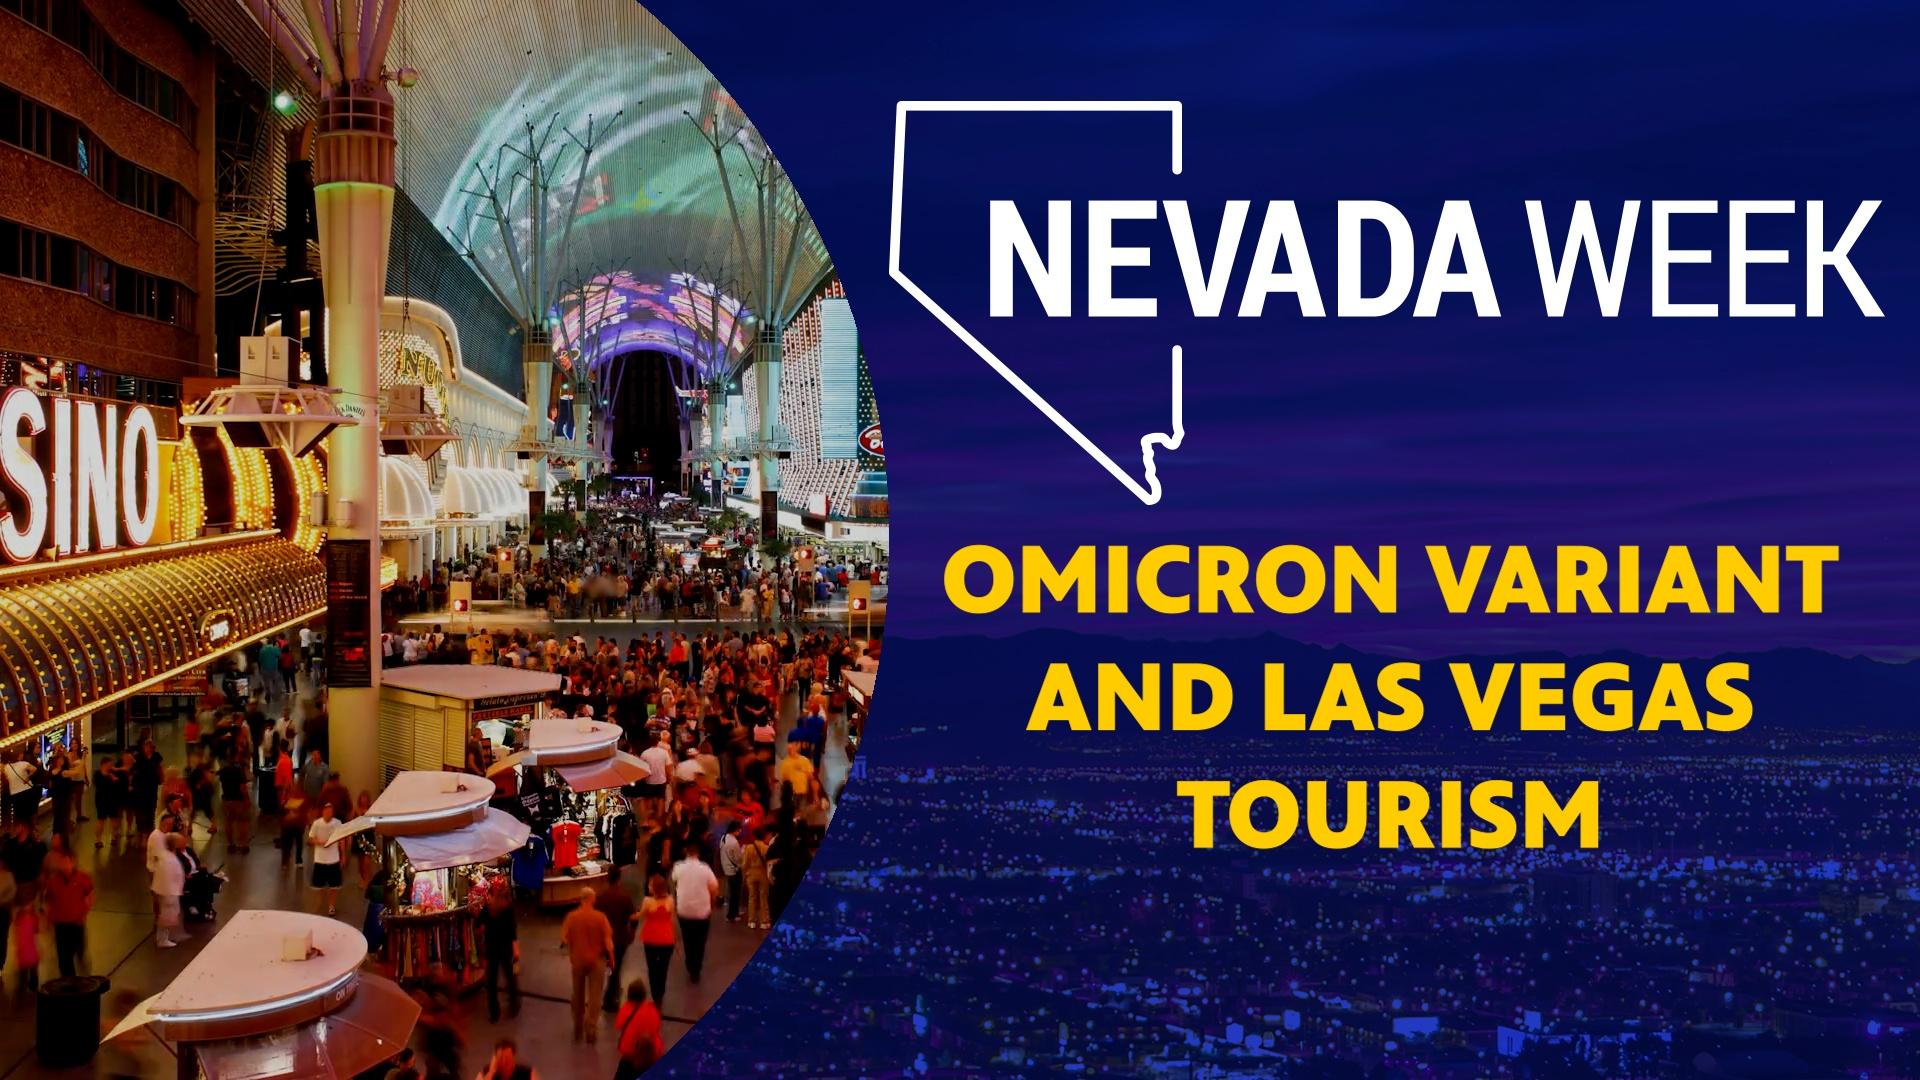 Nevada Week s4 ep22 |  Omicron Variant and Las Vegas Tourism         